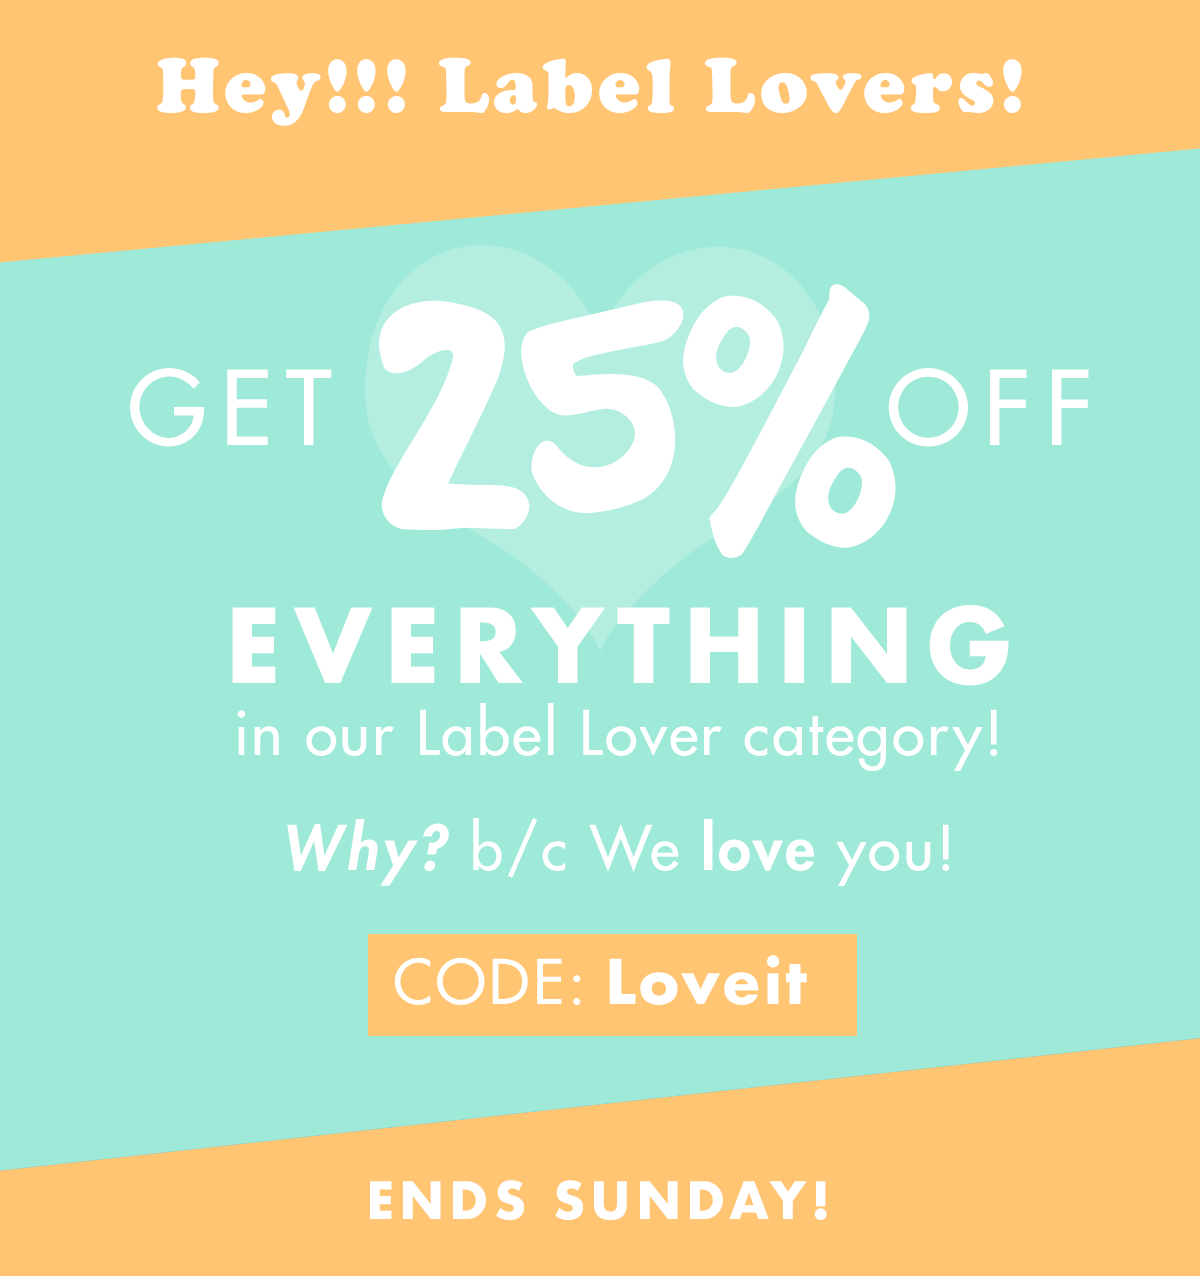 Get 25% off Our Label Love category! Use Code: LOVEIT, Ends Sunday